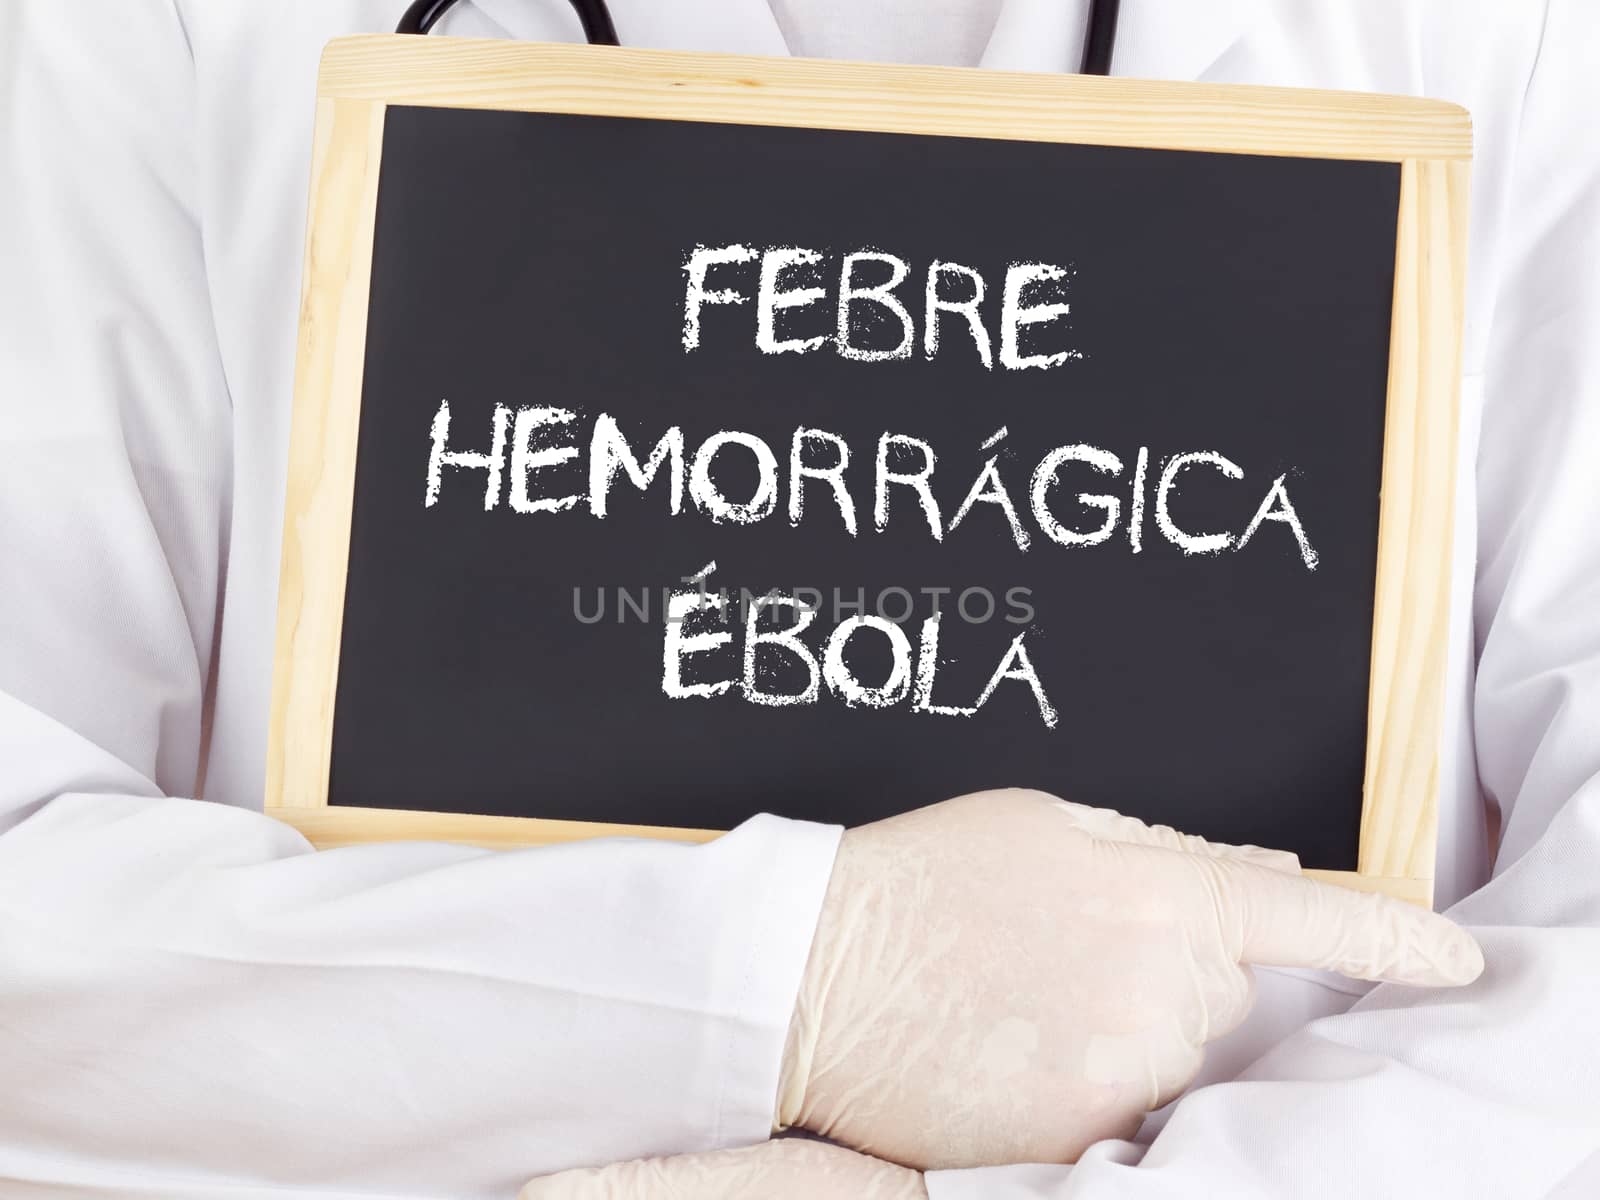 Doctor shows information: Ebola in portuguese language